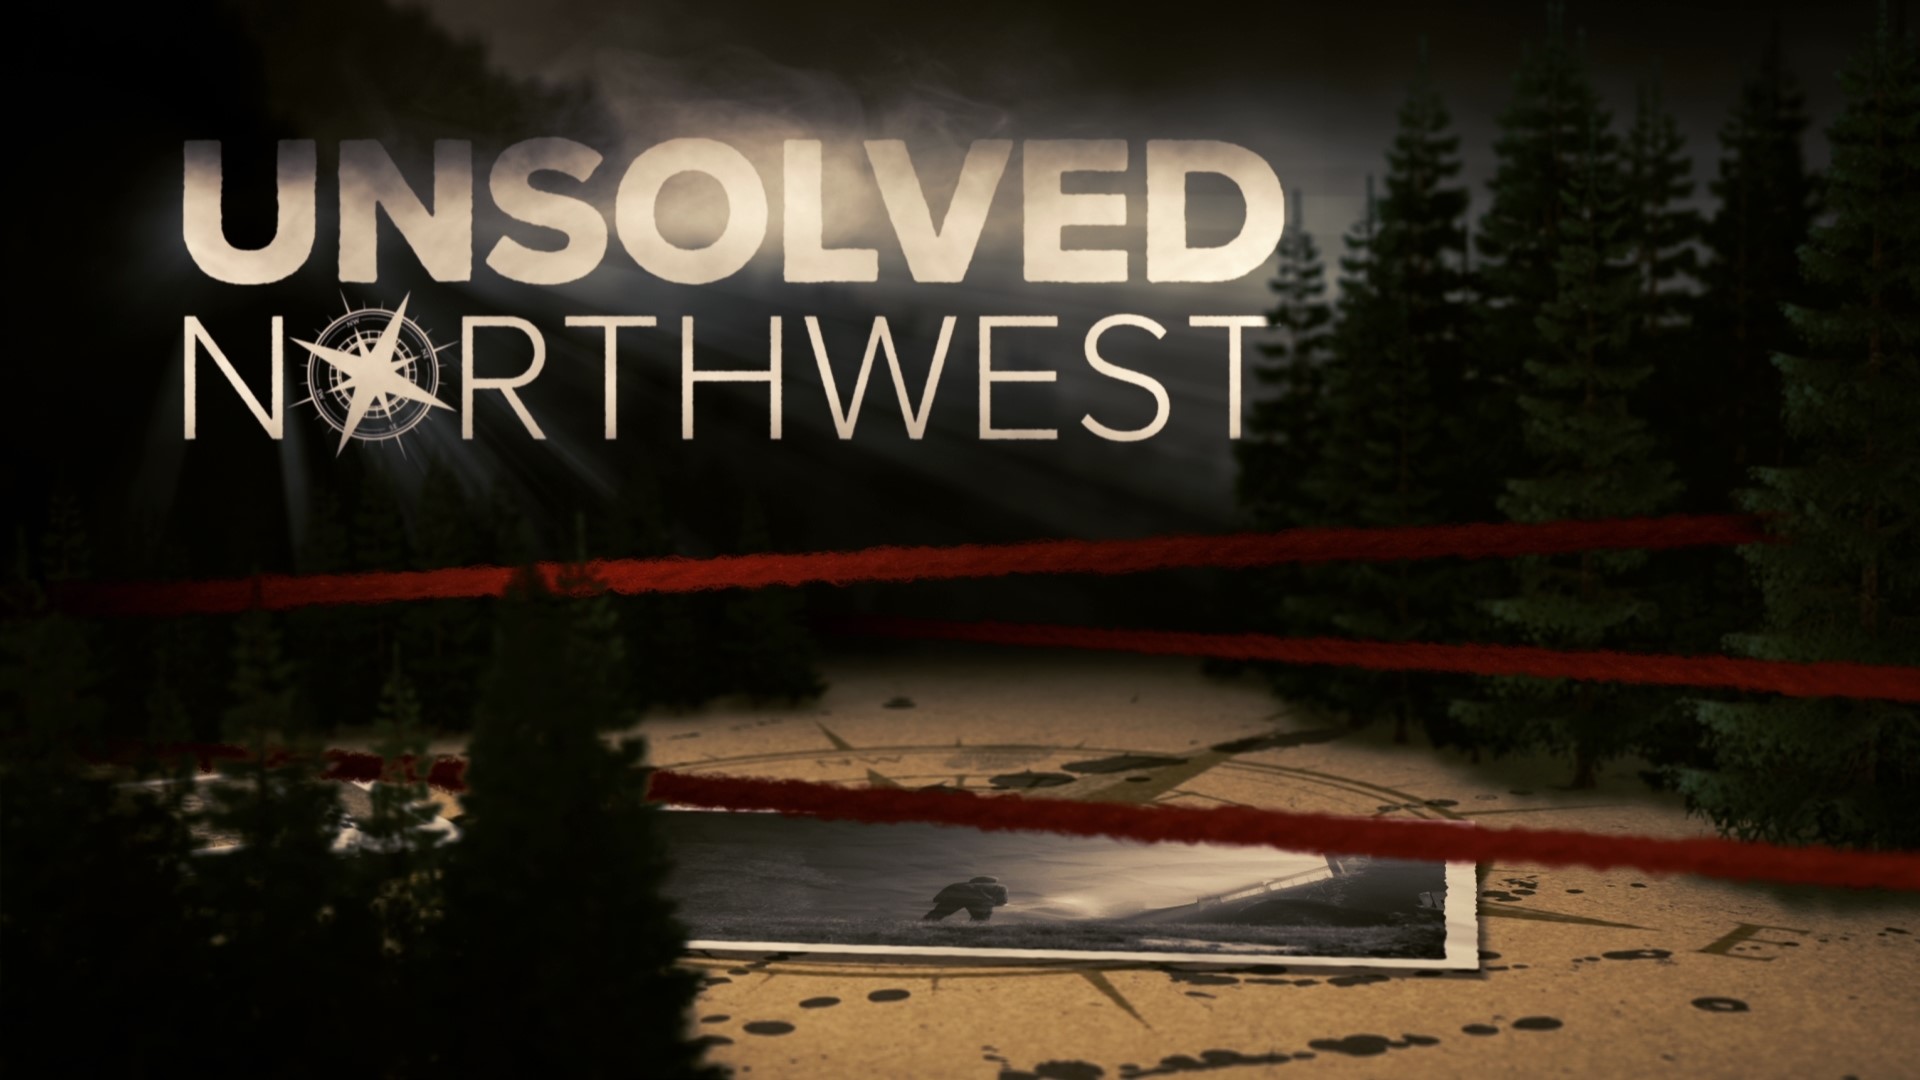 The Unsolved Northwest team will go through KING 5 archives and talk to victims' families and investigators to try to uncover the truth.